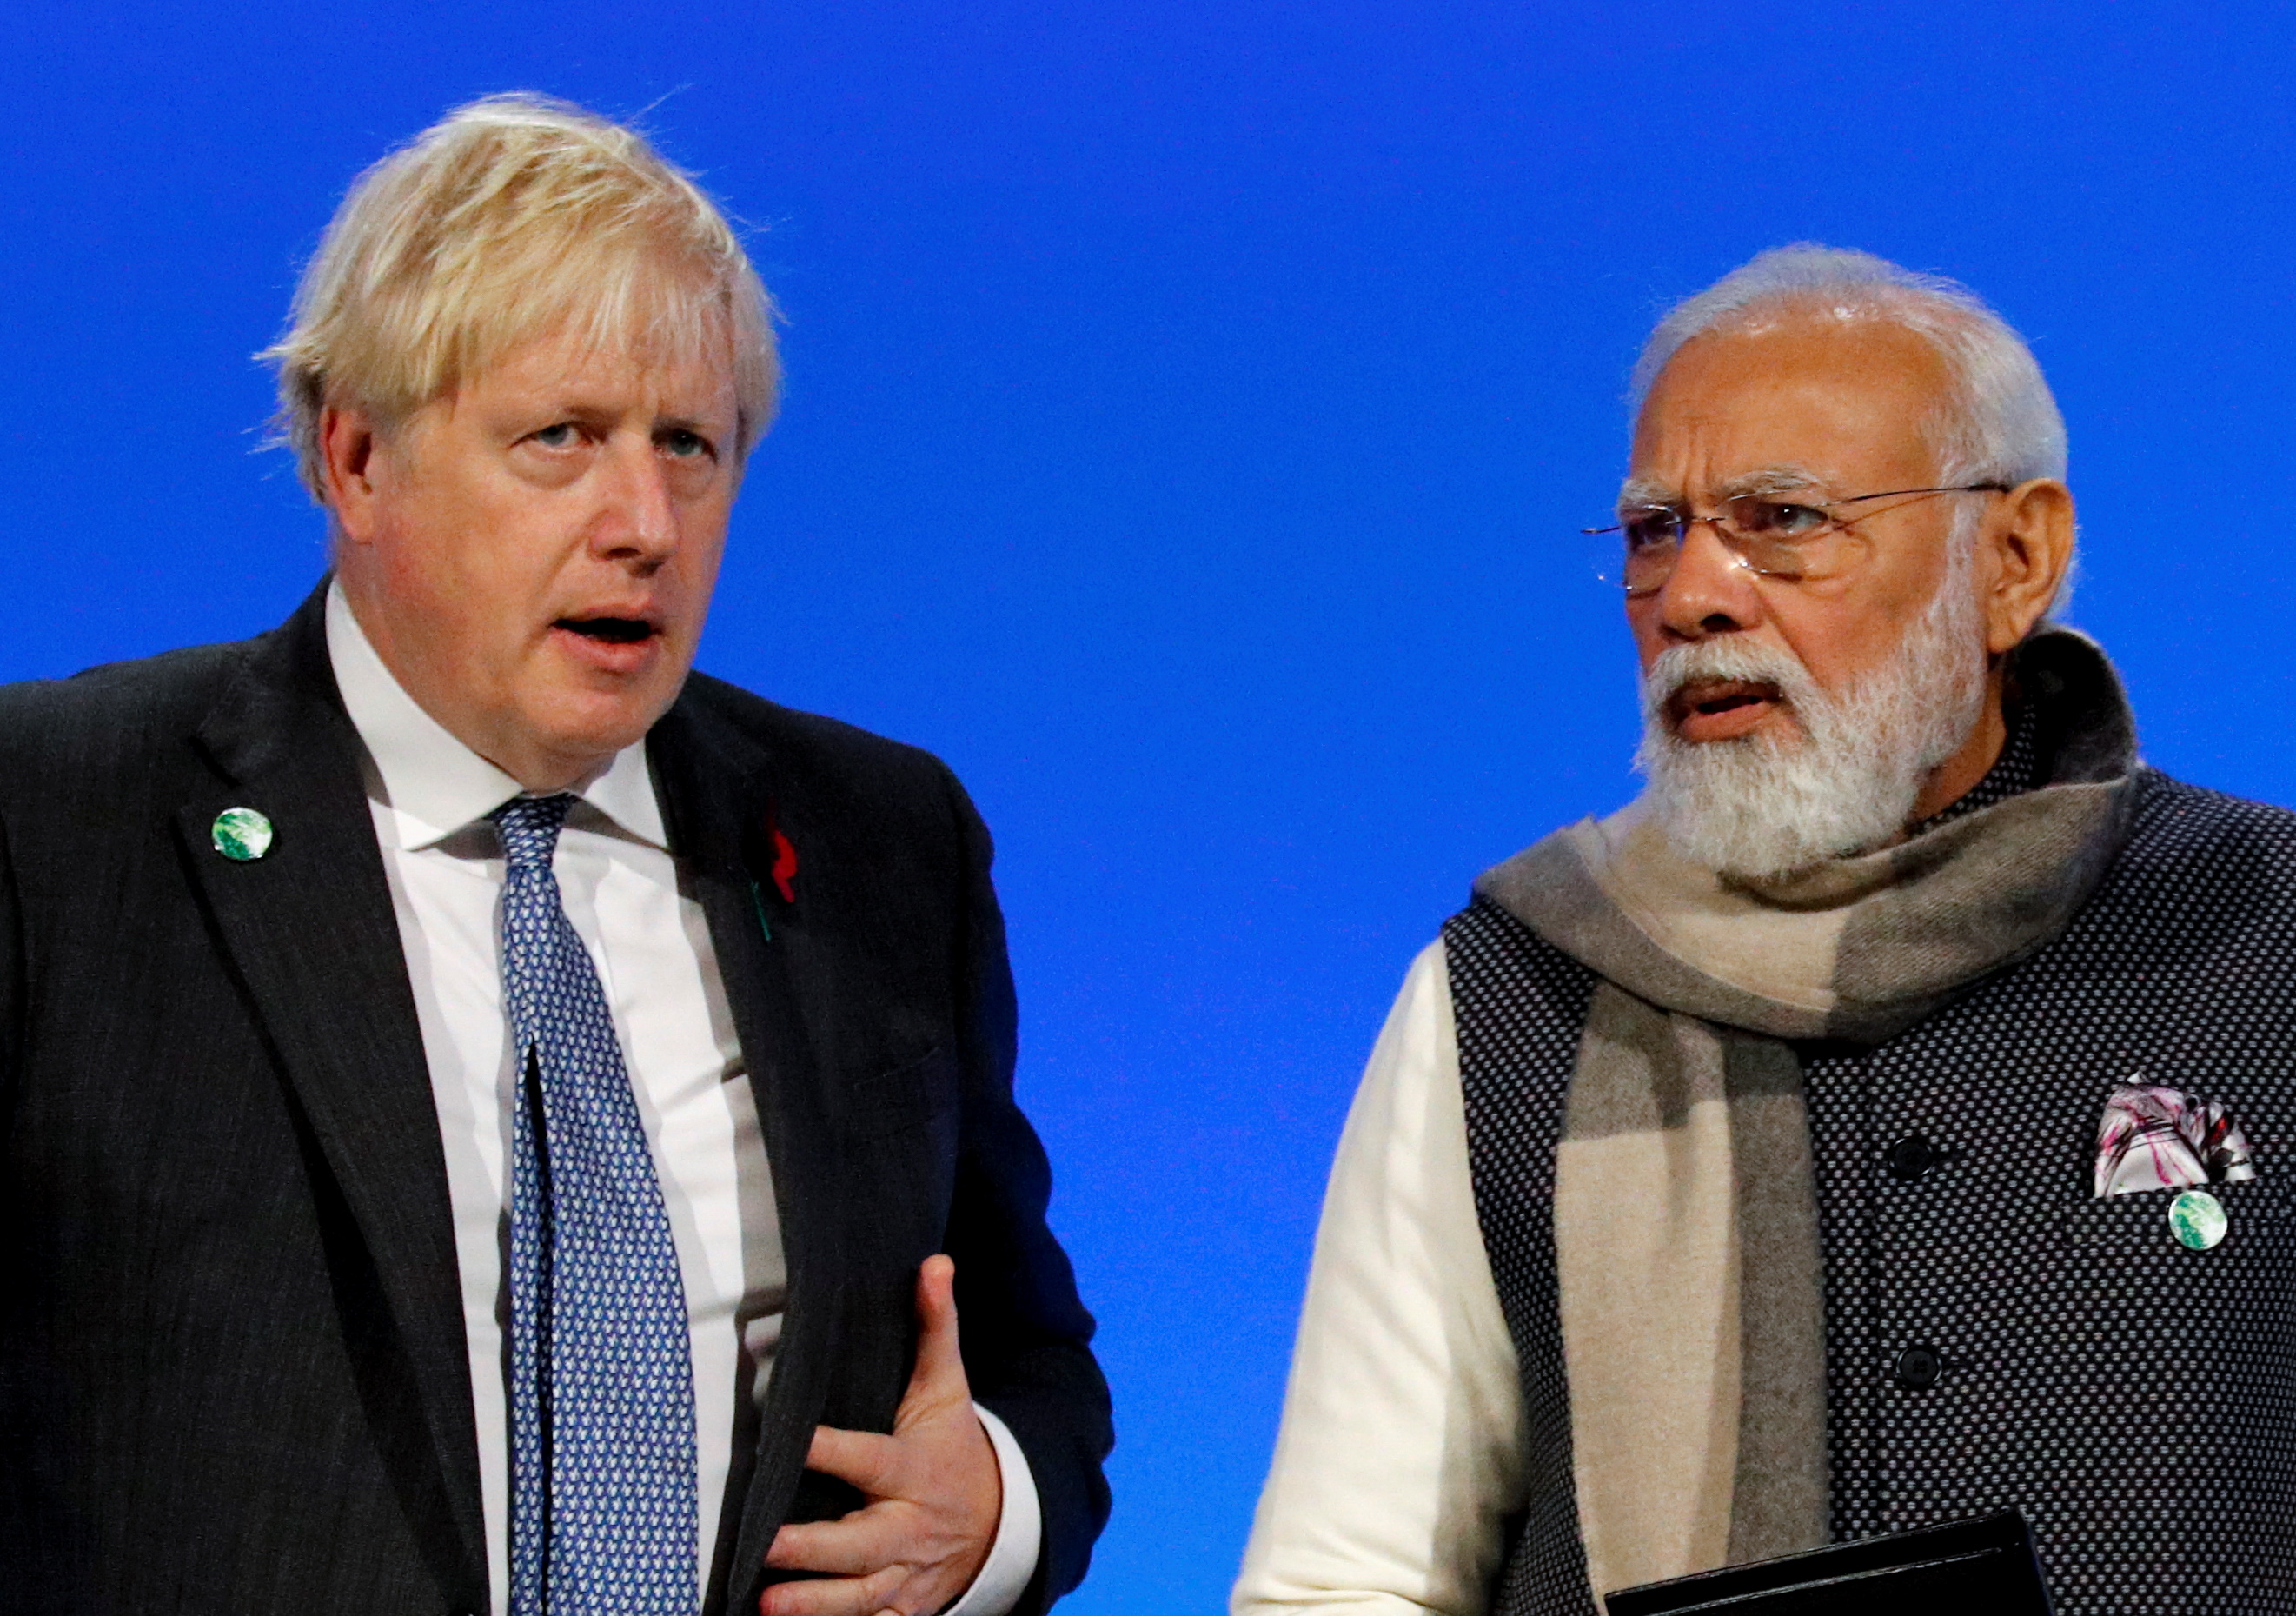 Britain's Prime Minister Boris Johnson and India's Prime Minister Narendra Modi attend a meeting during the UN Climate Change Conference (COP26) in Glasgow, Scotland, Britain, November 2, 2021. REUTERS/Phil Noble/Pool